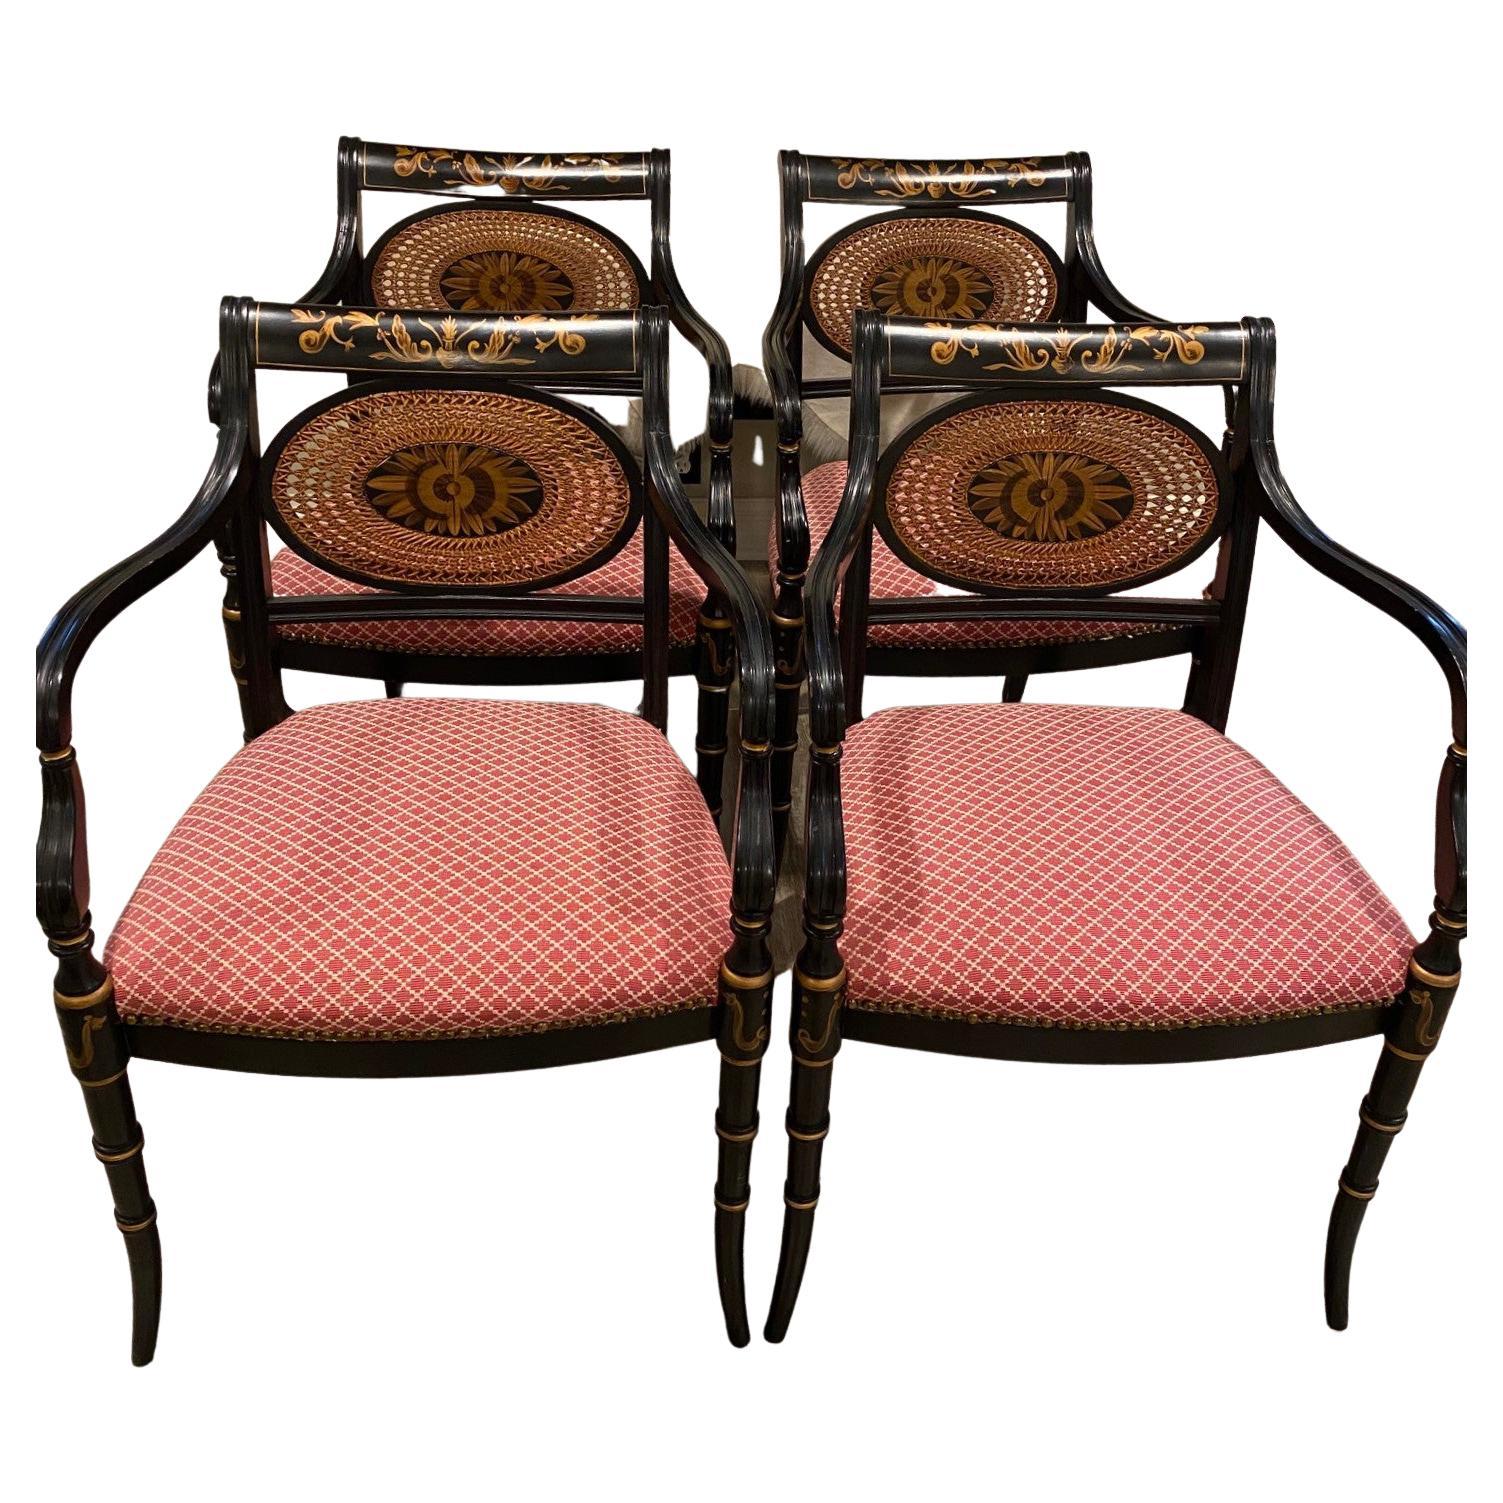 Mid 20th Century Regency Style Gilt Lacquer Dining Chairs - Set of 4